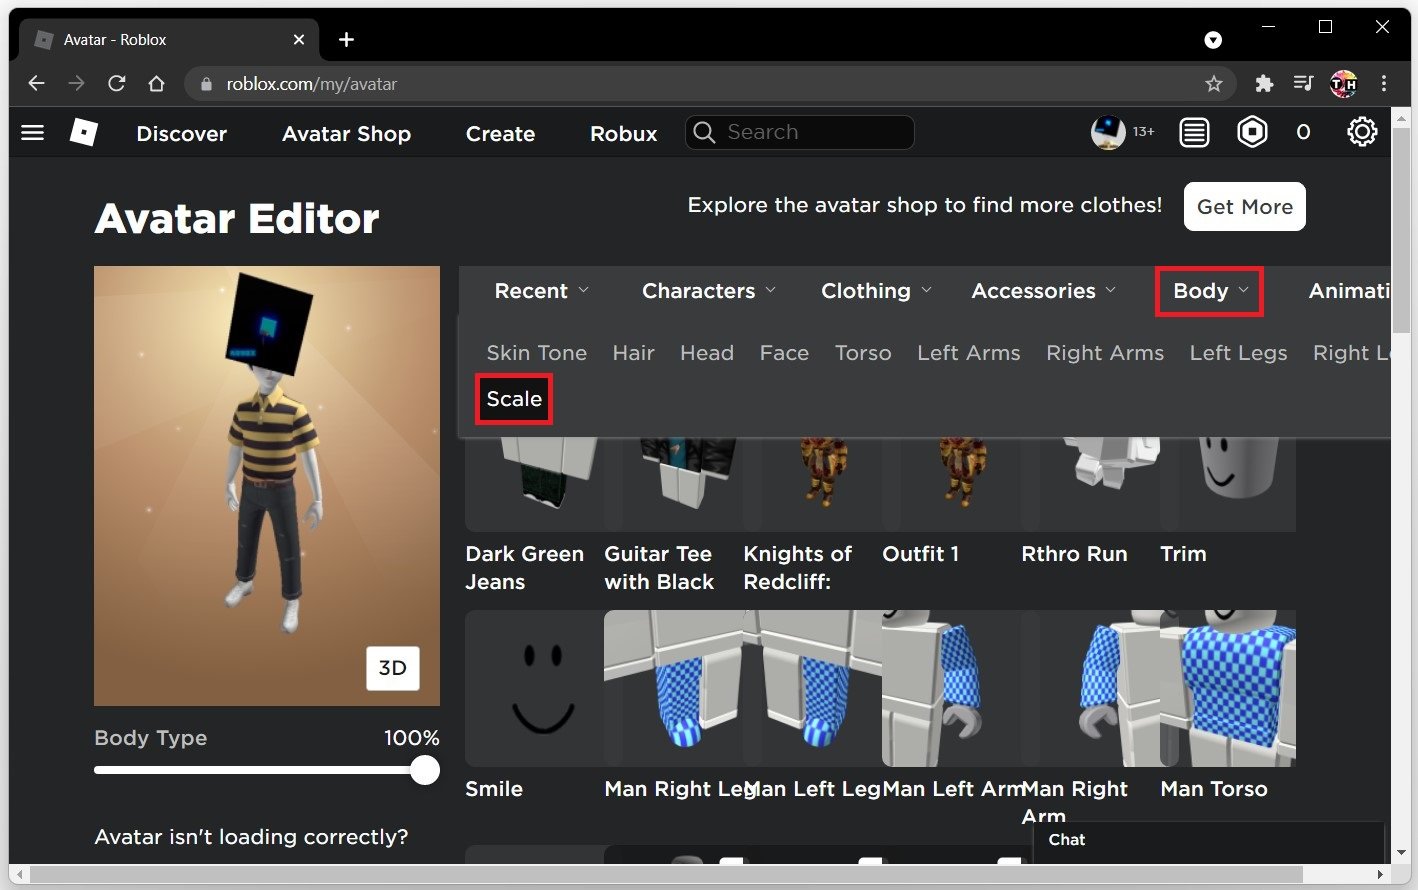 How to edit your avatar in Roblox